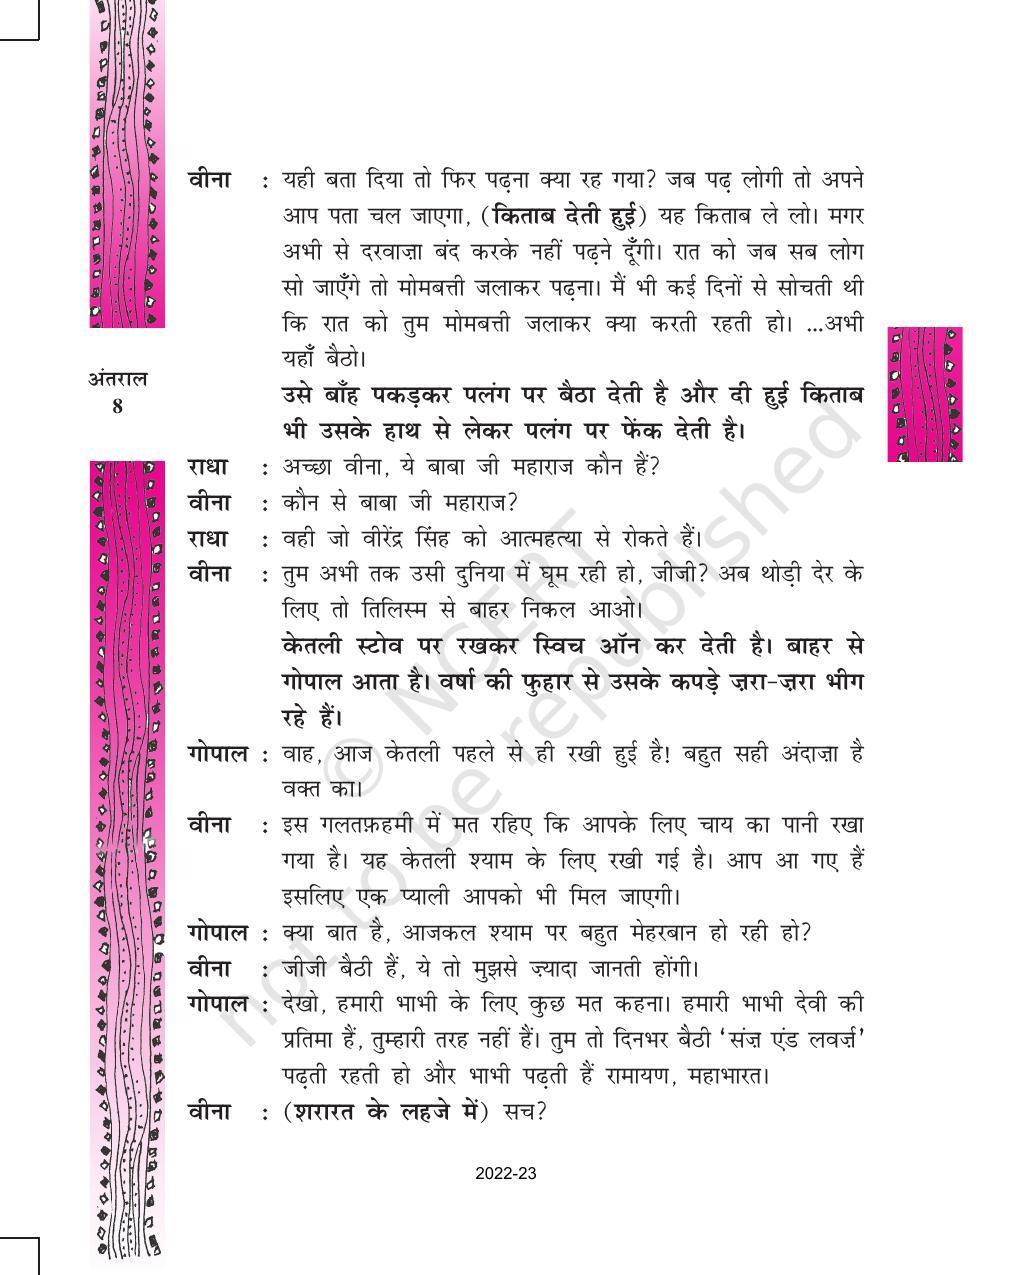 NCERT Book for Class 11 Hindi Antral Chapter 1 अंडे के छिलके - Page 8